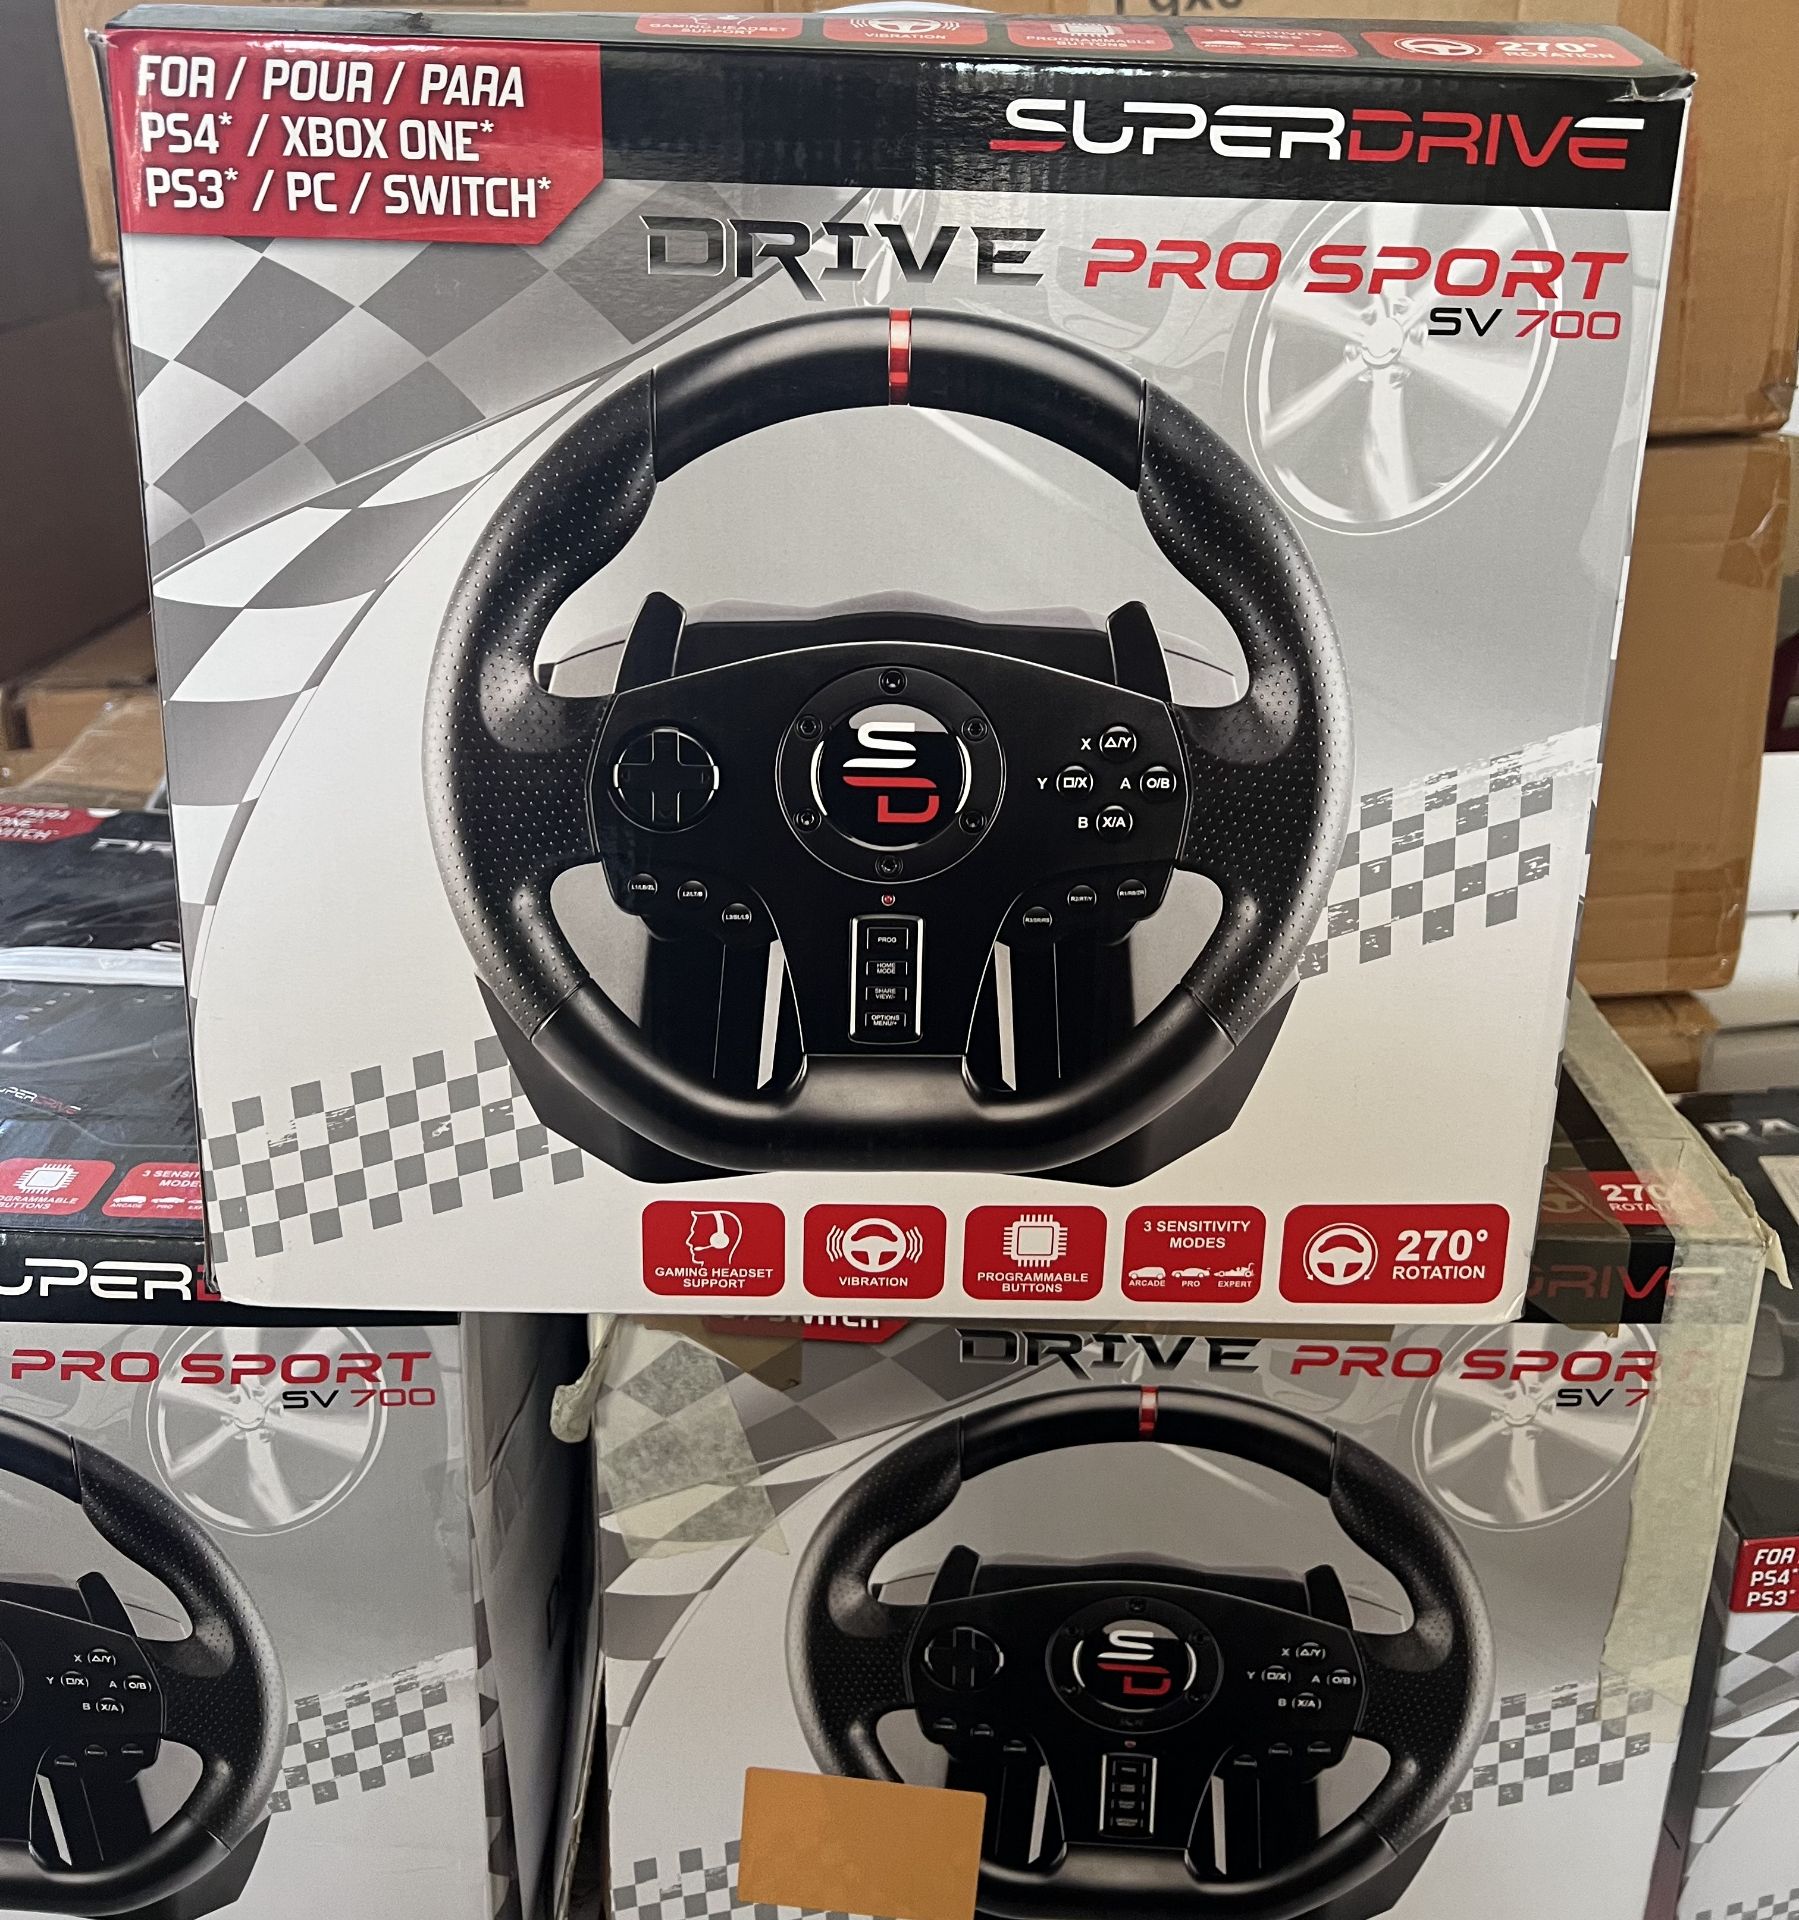 RAW RETURN - 5 x SUBSONIC SV700 Drive Pro Sport Wheel/Pedals - PS3&4/XBOX/PC/SWITCH- RRP NEW £500+ ! - Image 5 of 8